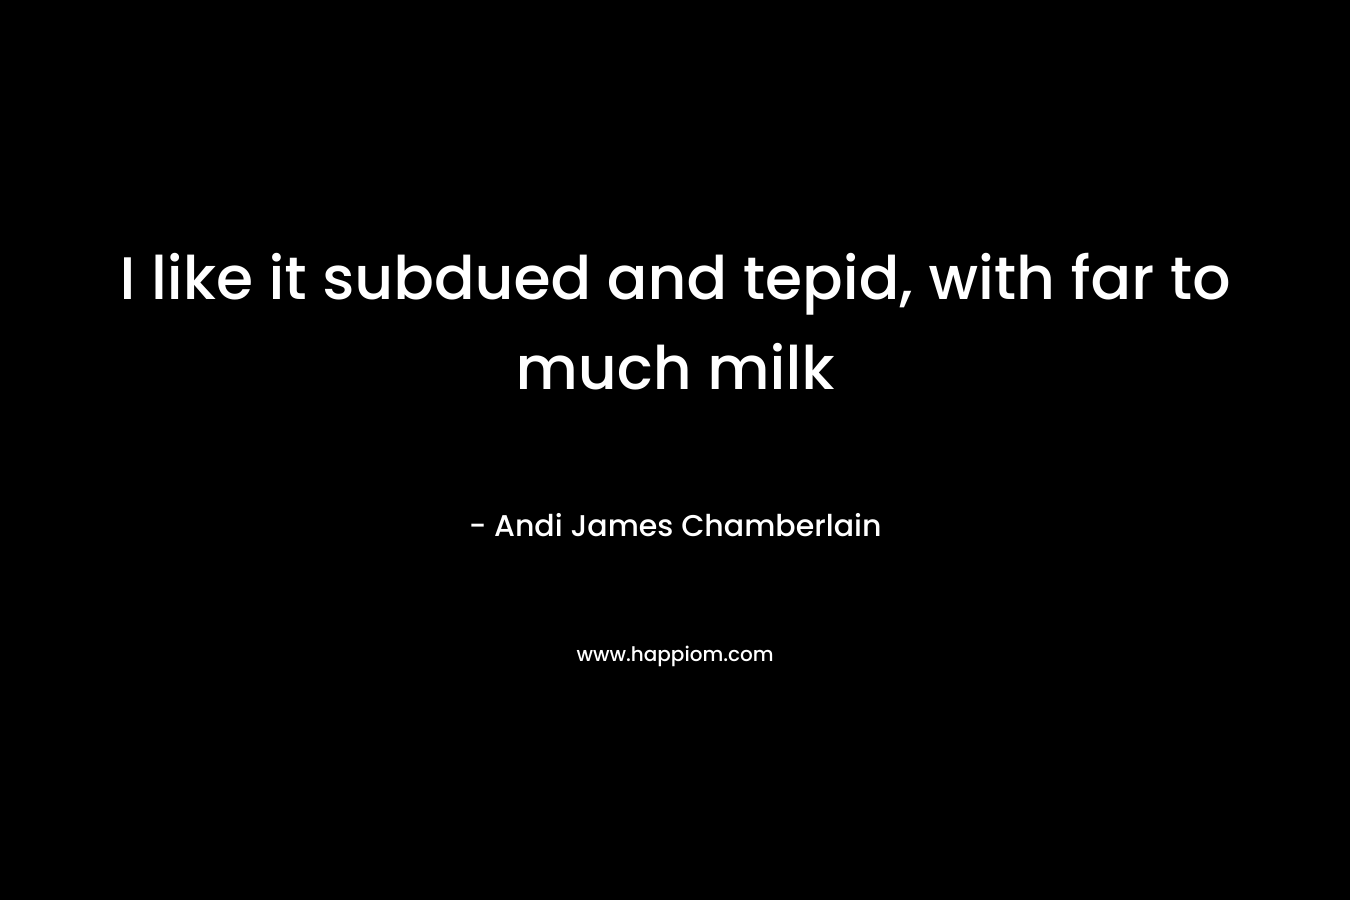 I like it subdued and tepid, with far to much milk – Andi James Chamberlain